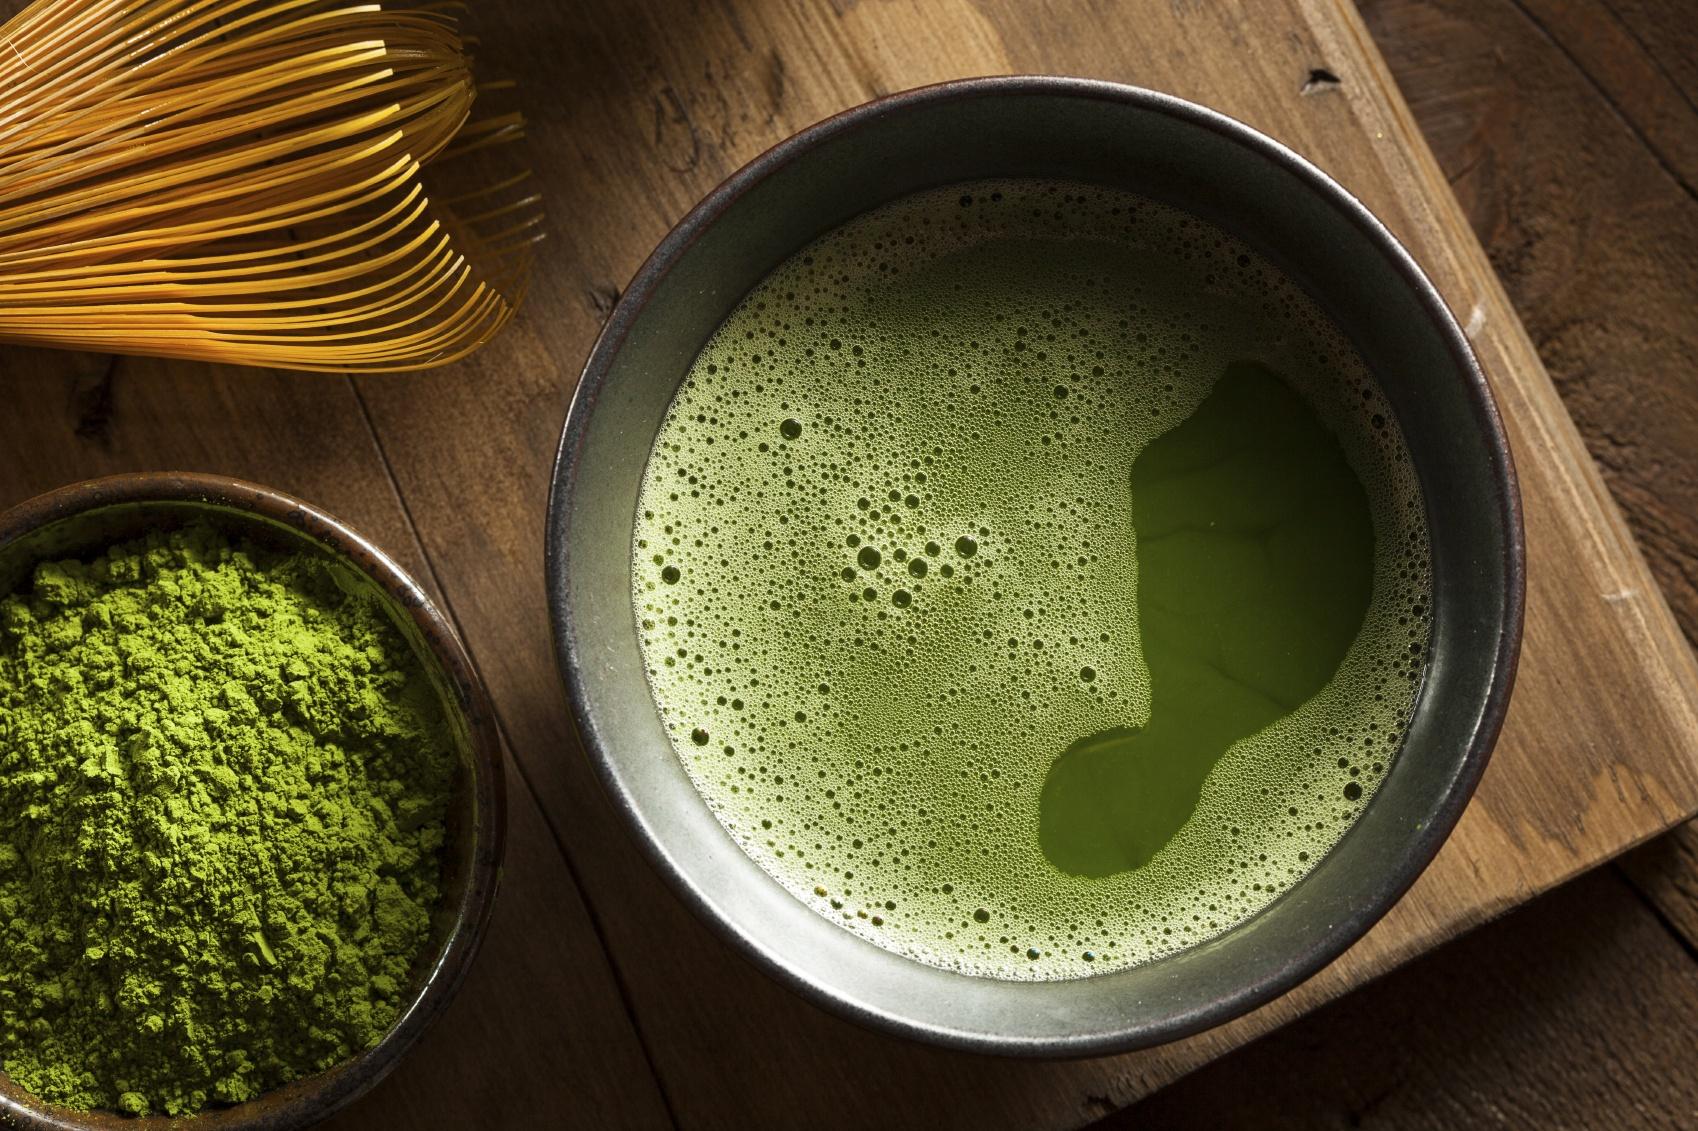 When is the best time to consume Matcha?